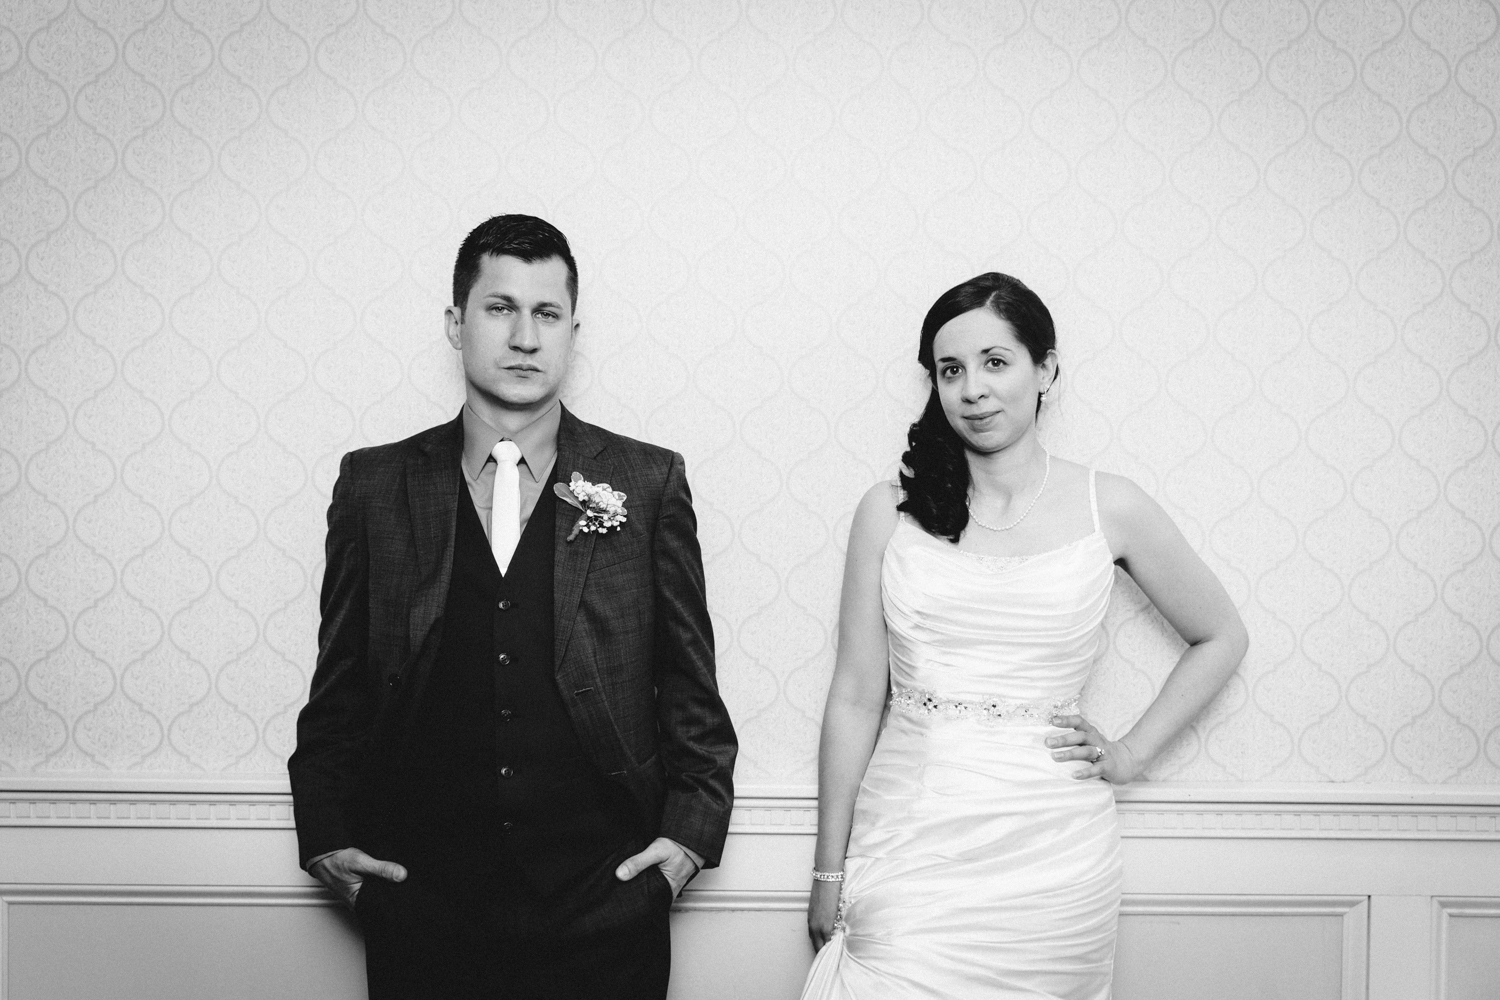  Serious bride and groom portrait 